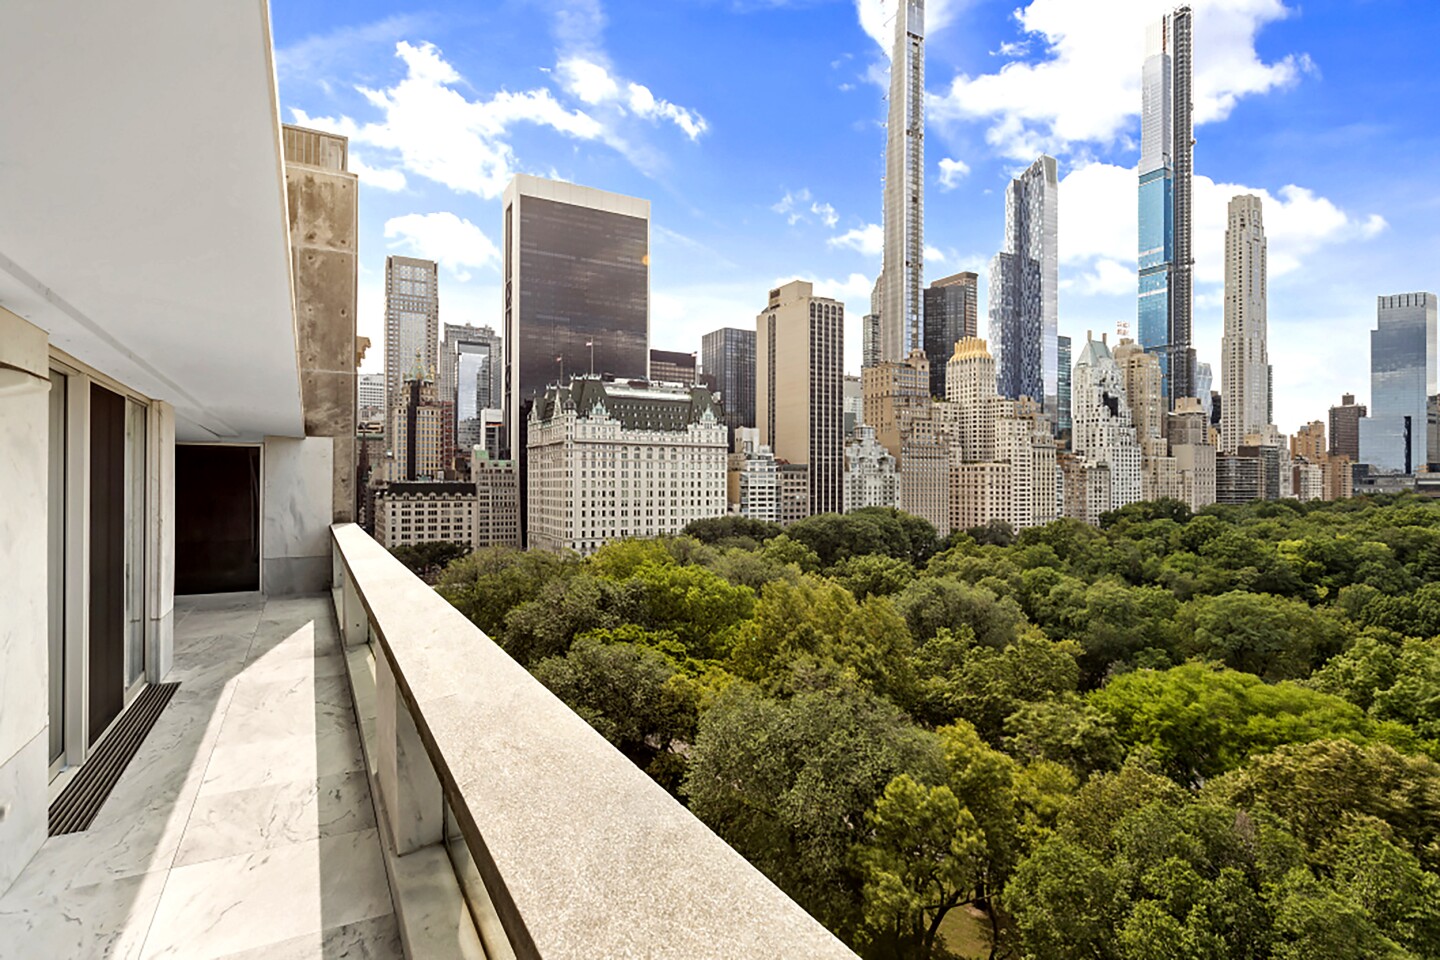 The Fifth Avenue co-op once owned by U.S. Vice President Nelson Rockefeller takes up an entire floor and overlooks Central Park in Manhattan.